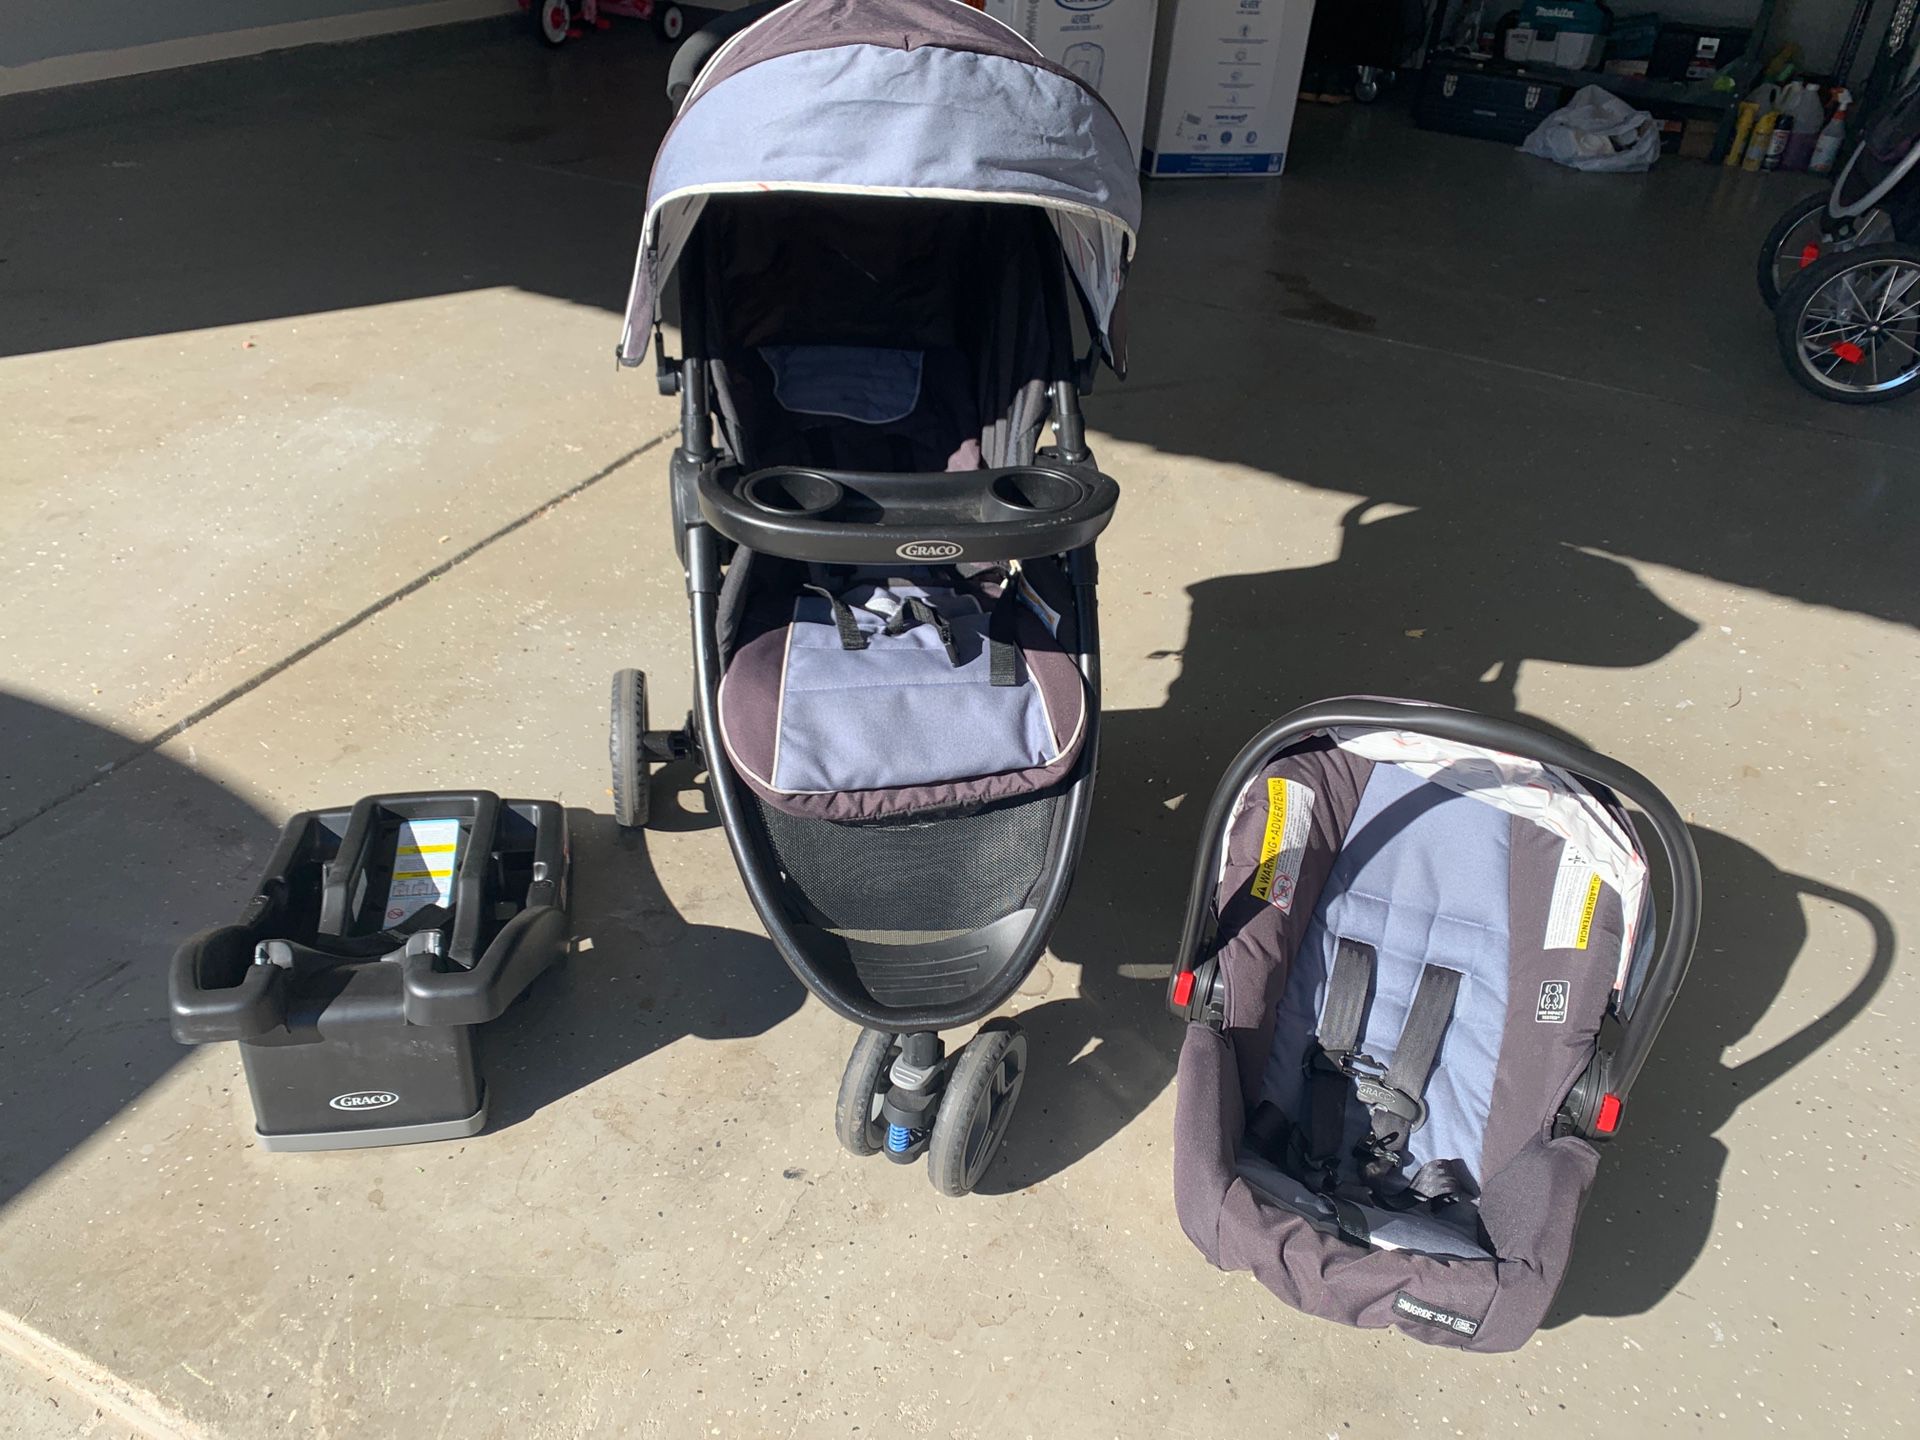 Graco stroller with car seat and base